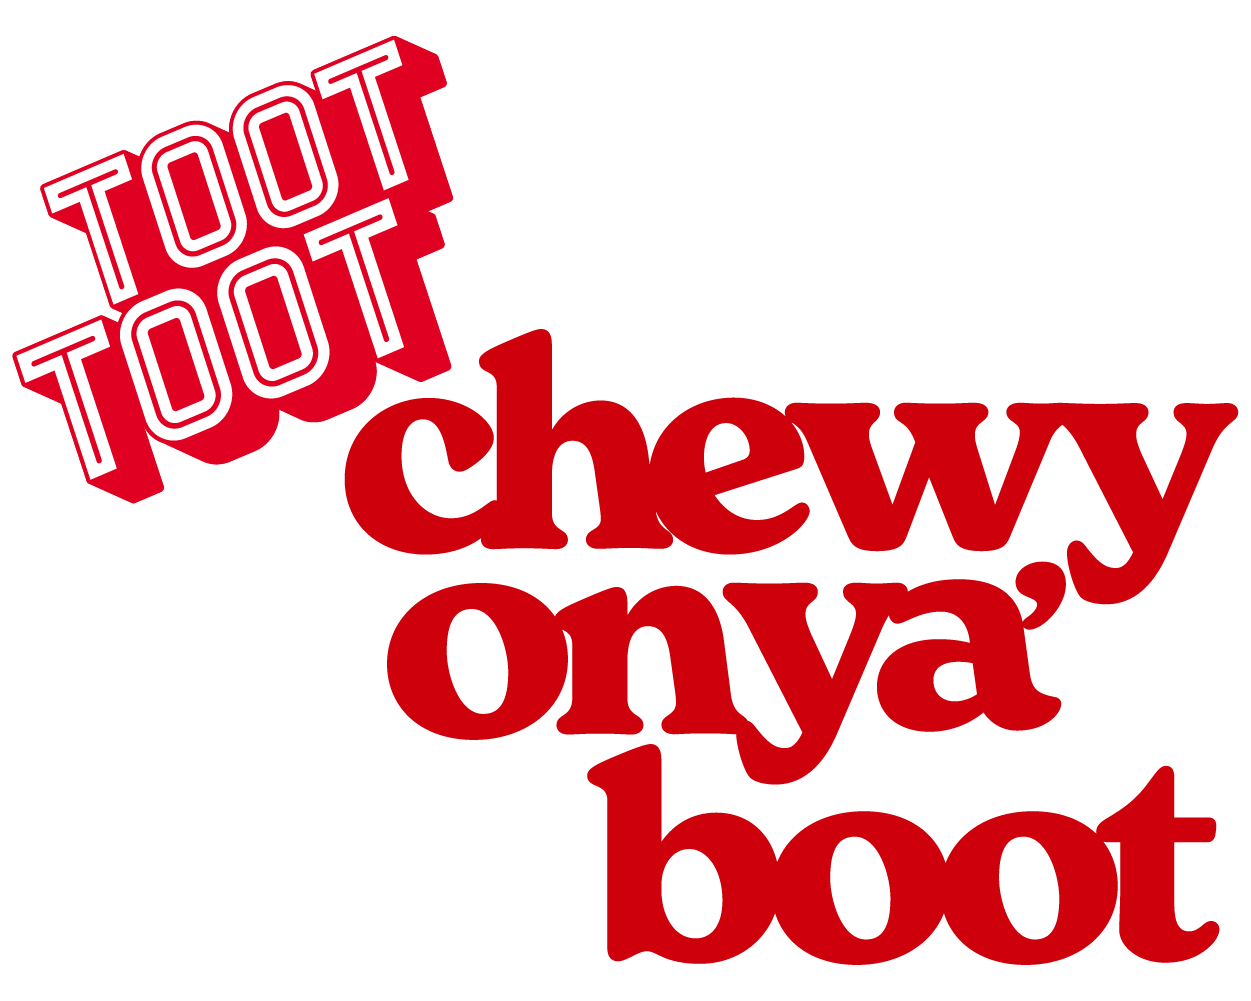 toot toot chewy onya boot